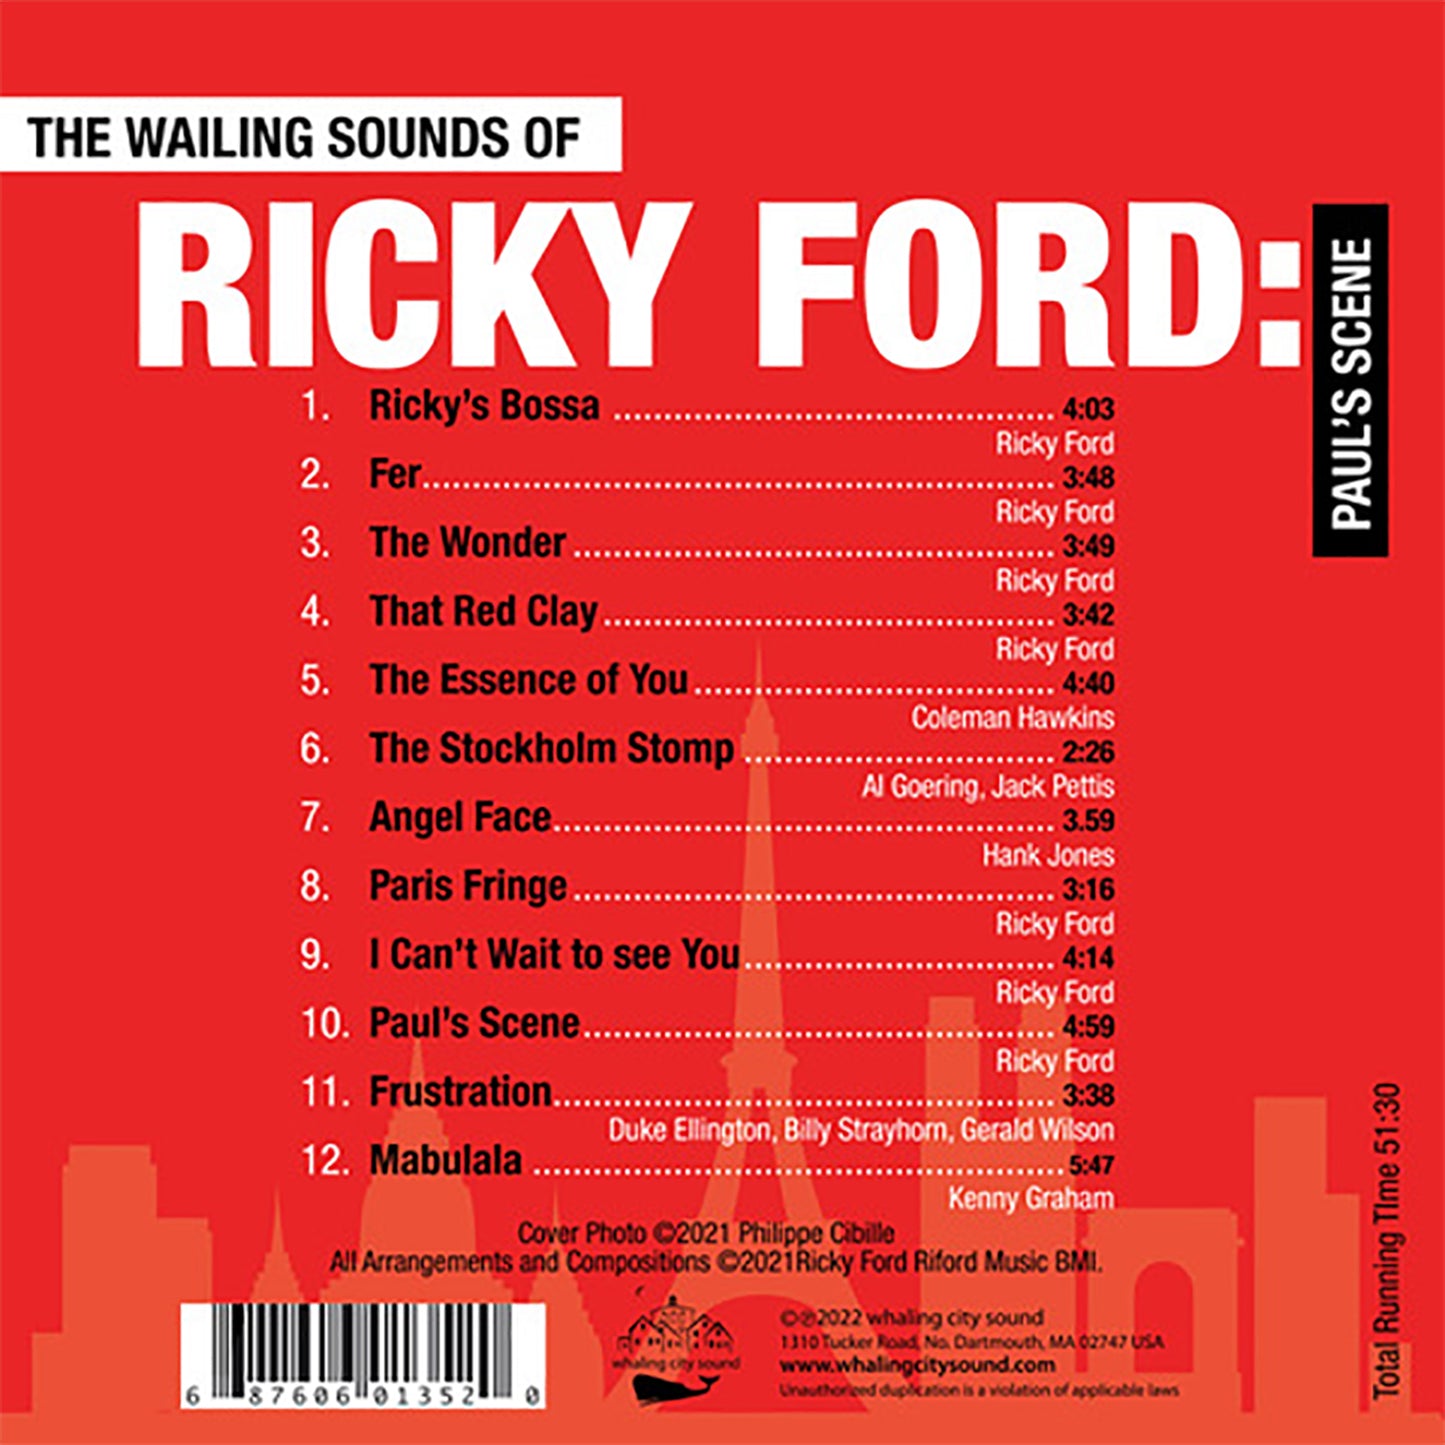 The Wailing Sounds Of Ricky Ford - Paul’S Scene  Ricky Ford, Mark Soskin, Jerome Harris, Barry Altschul